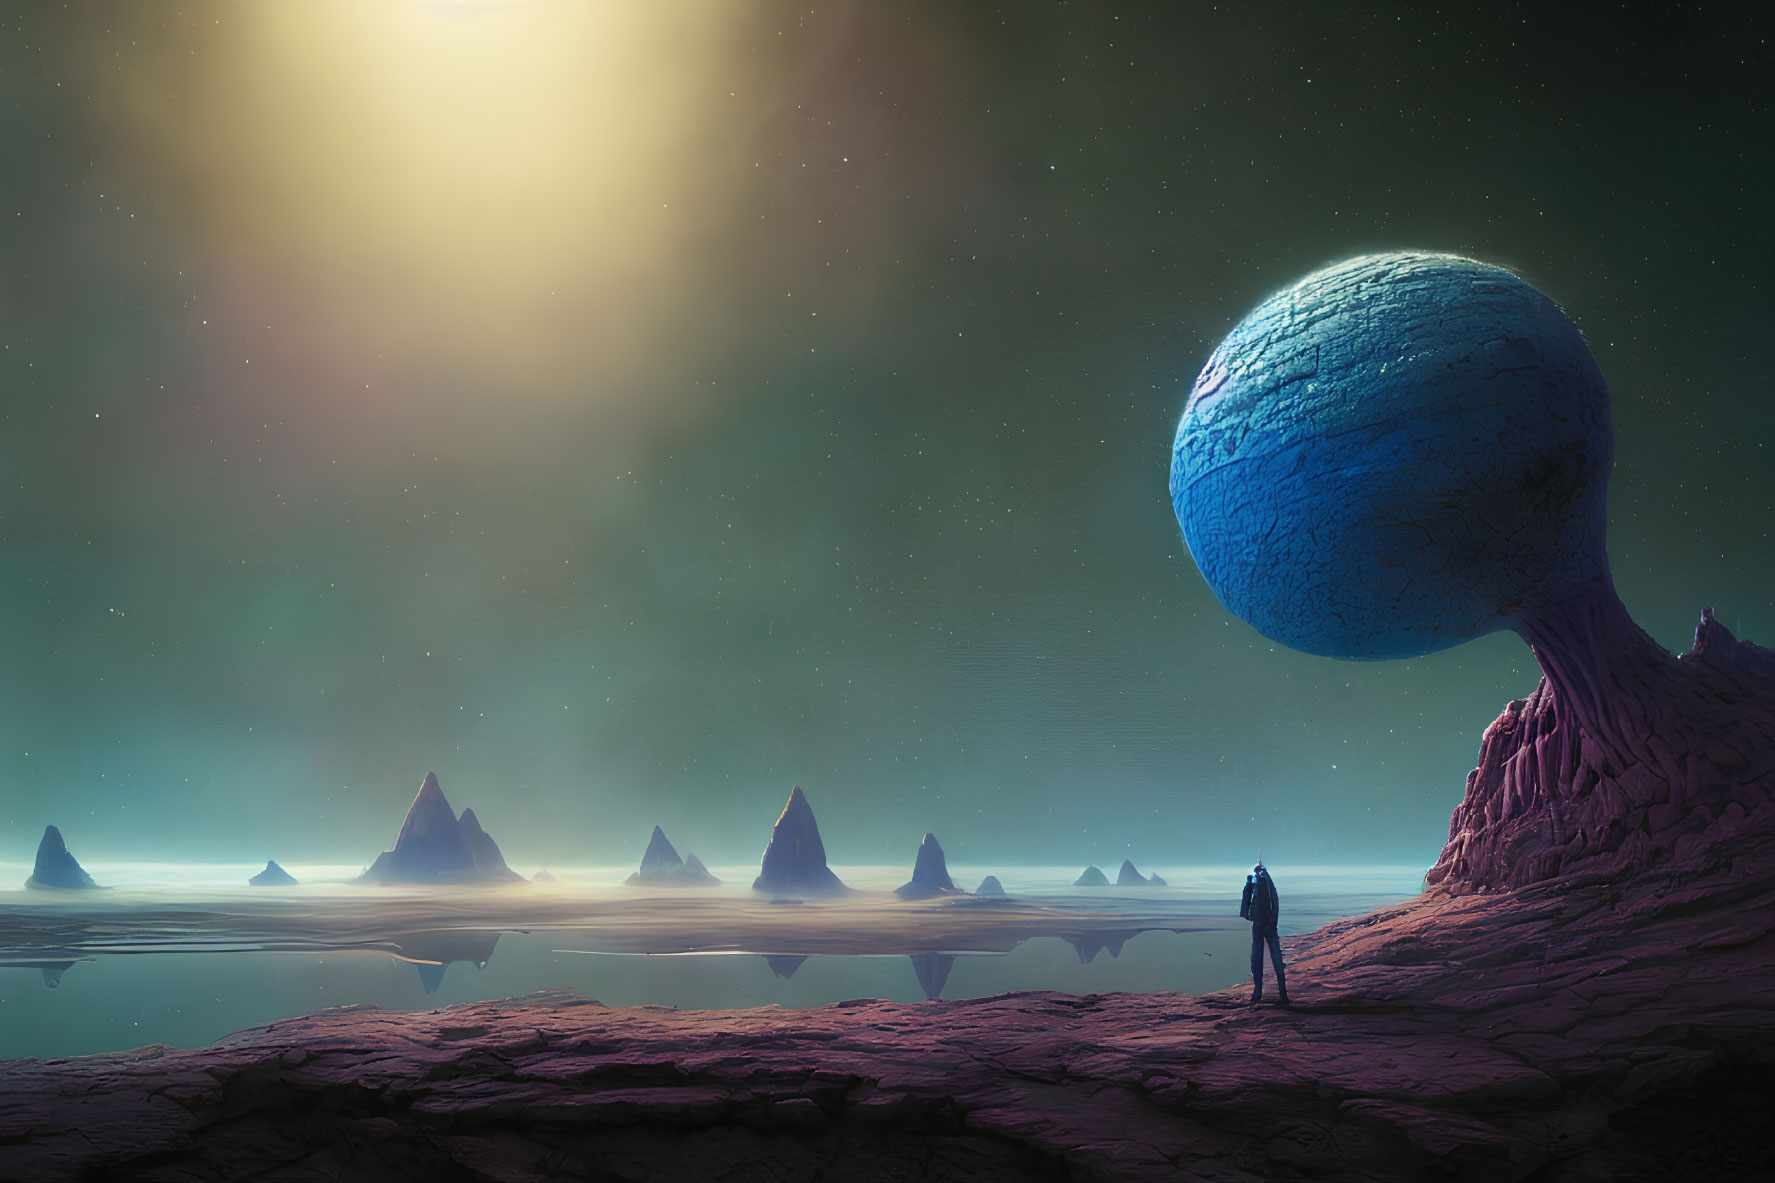 Person on alien landscape with towering spires and large blue sphere under celestial glow